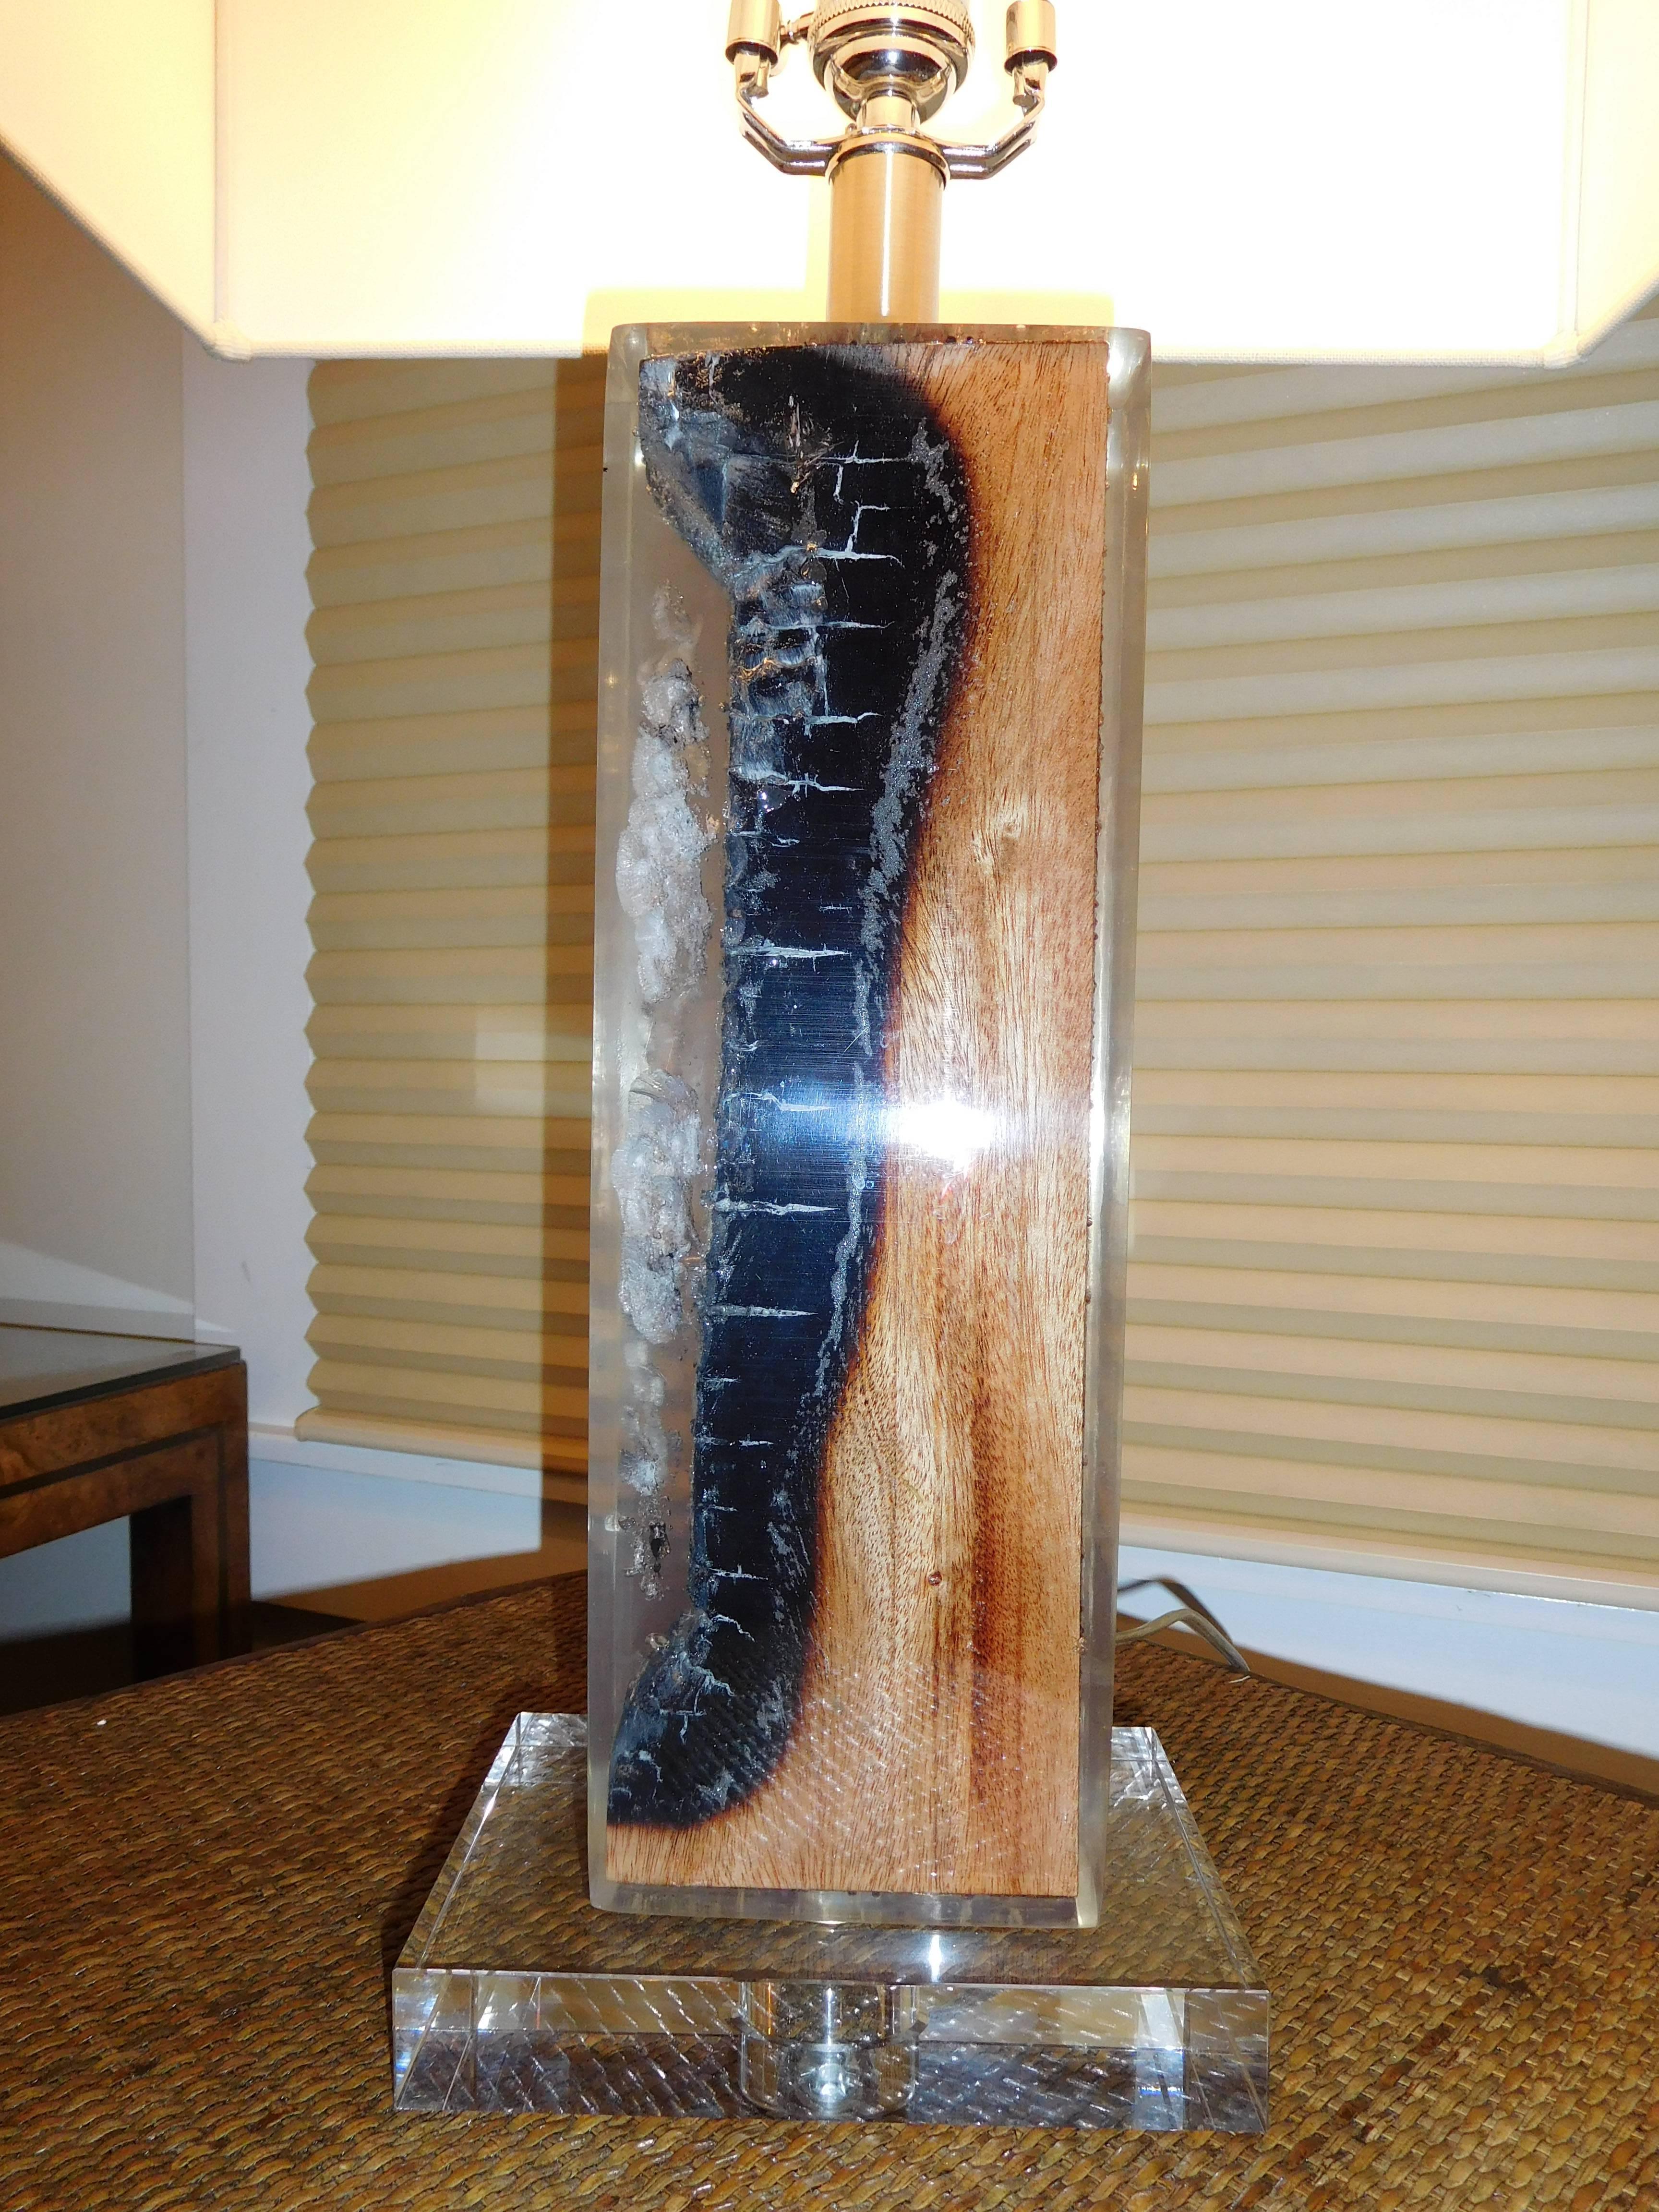 Pair of  organic free edge petrified wood table lamps,  encased in Lucite, includes the rectangle  shades..
Three way switch, beautiful in any setting.